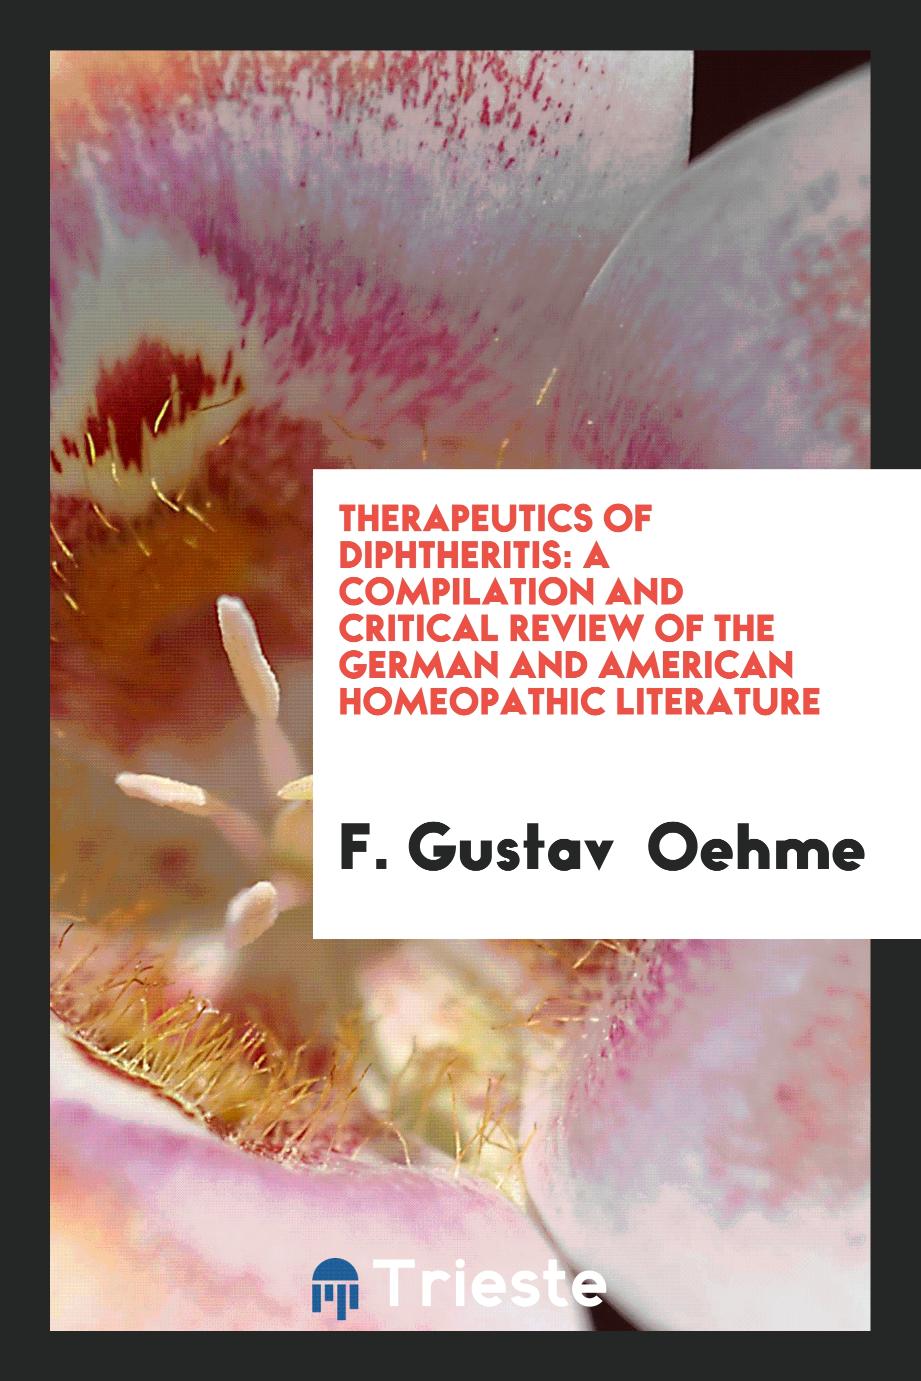 Therapeutics of diphtheritis: A Compilation and Critical Review of the German and American Homeopathic literature